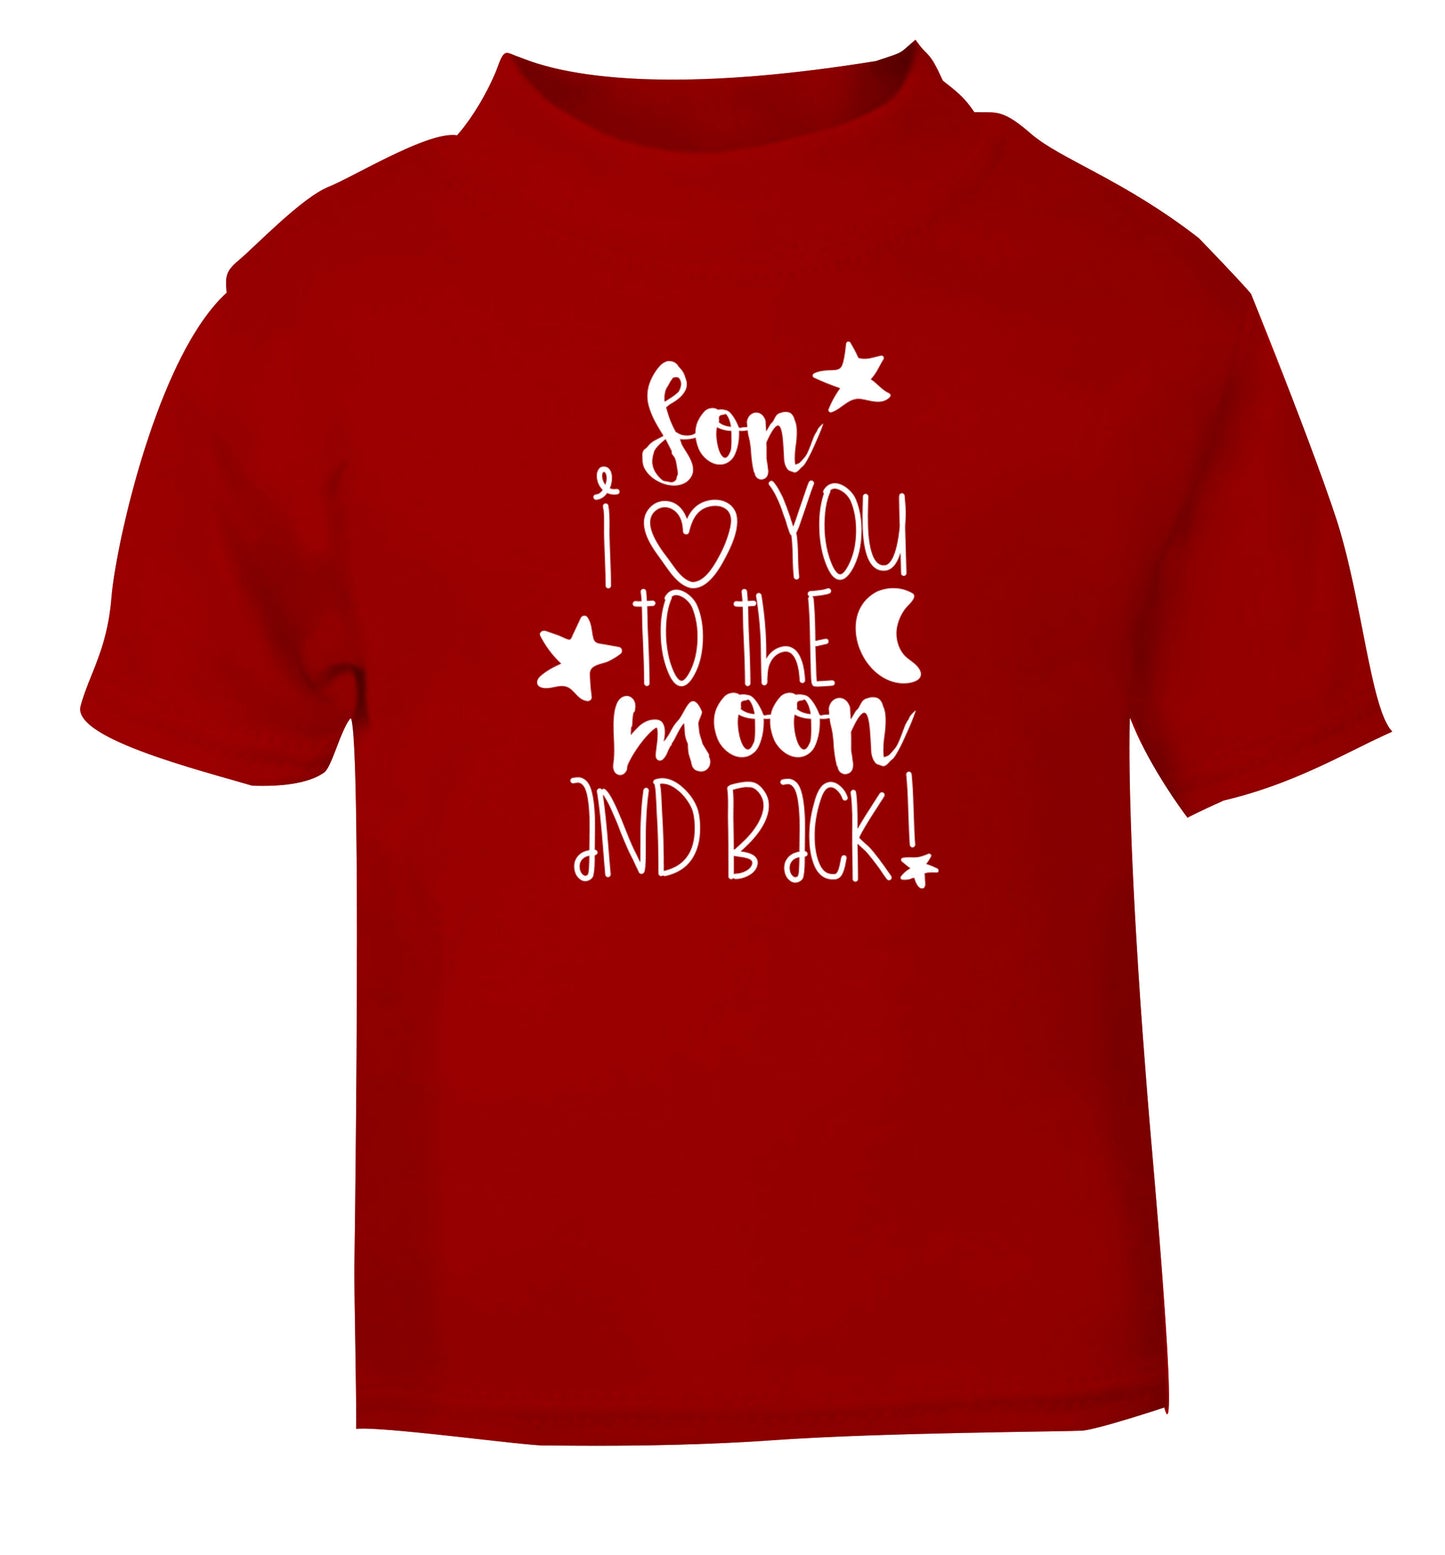 Son I love you to the moon and back red Baby Toddler Tshirt 2 Years